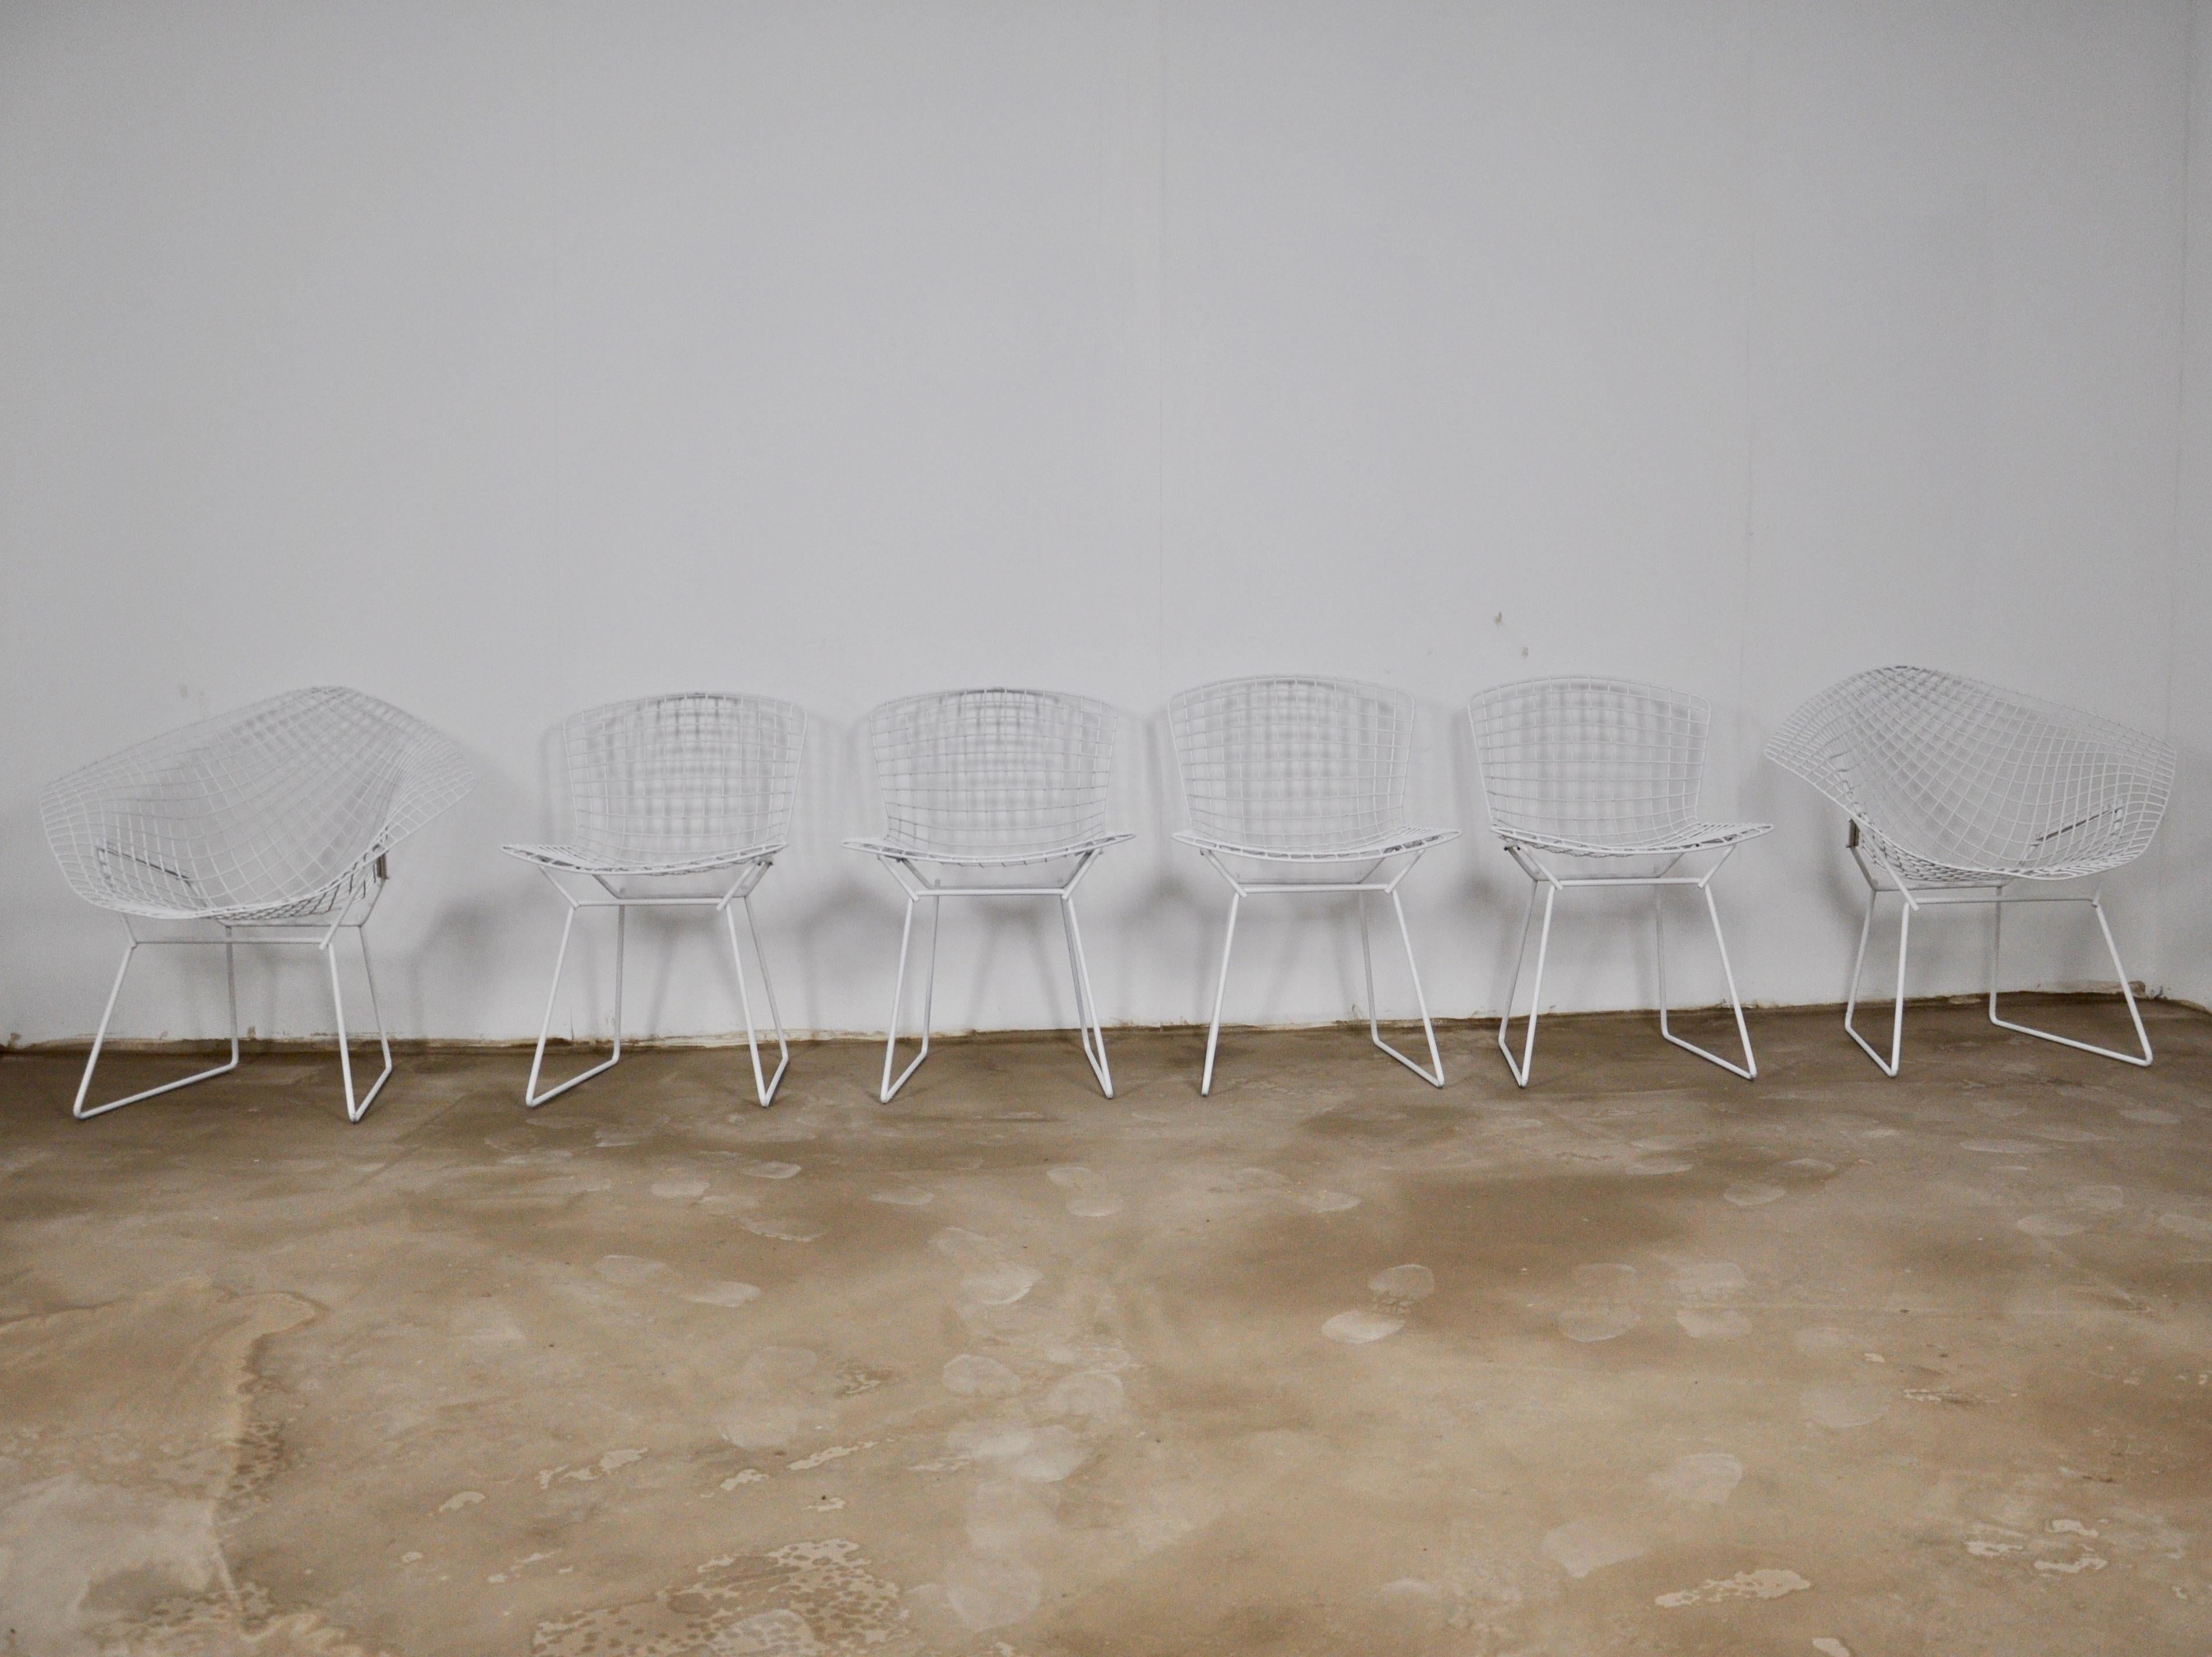 Set of 2 diamond armchairs by Harry Bertoia and 4 white chairs. Seat height 43cm
Chair dimensions: H 76cm, W 53cm, D 53cm.